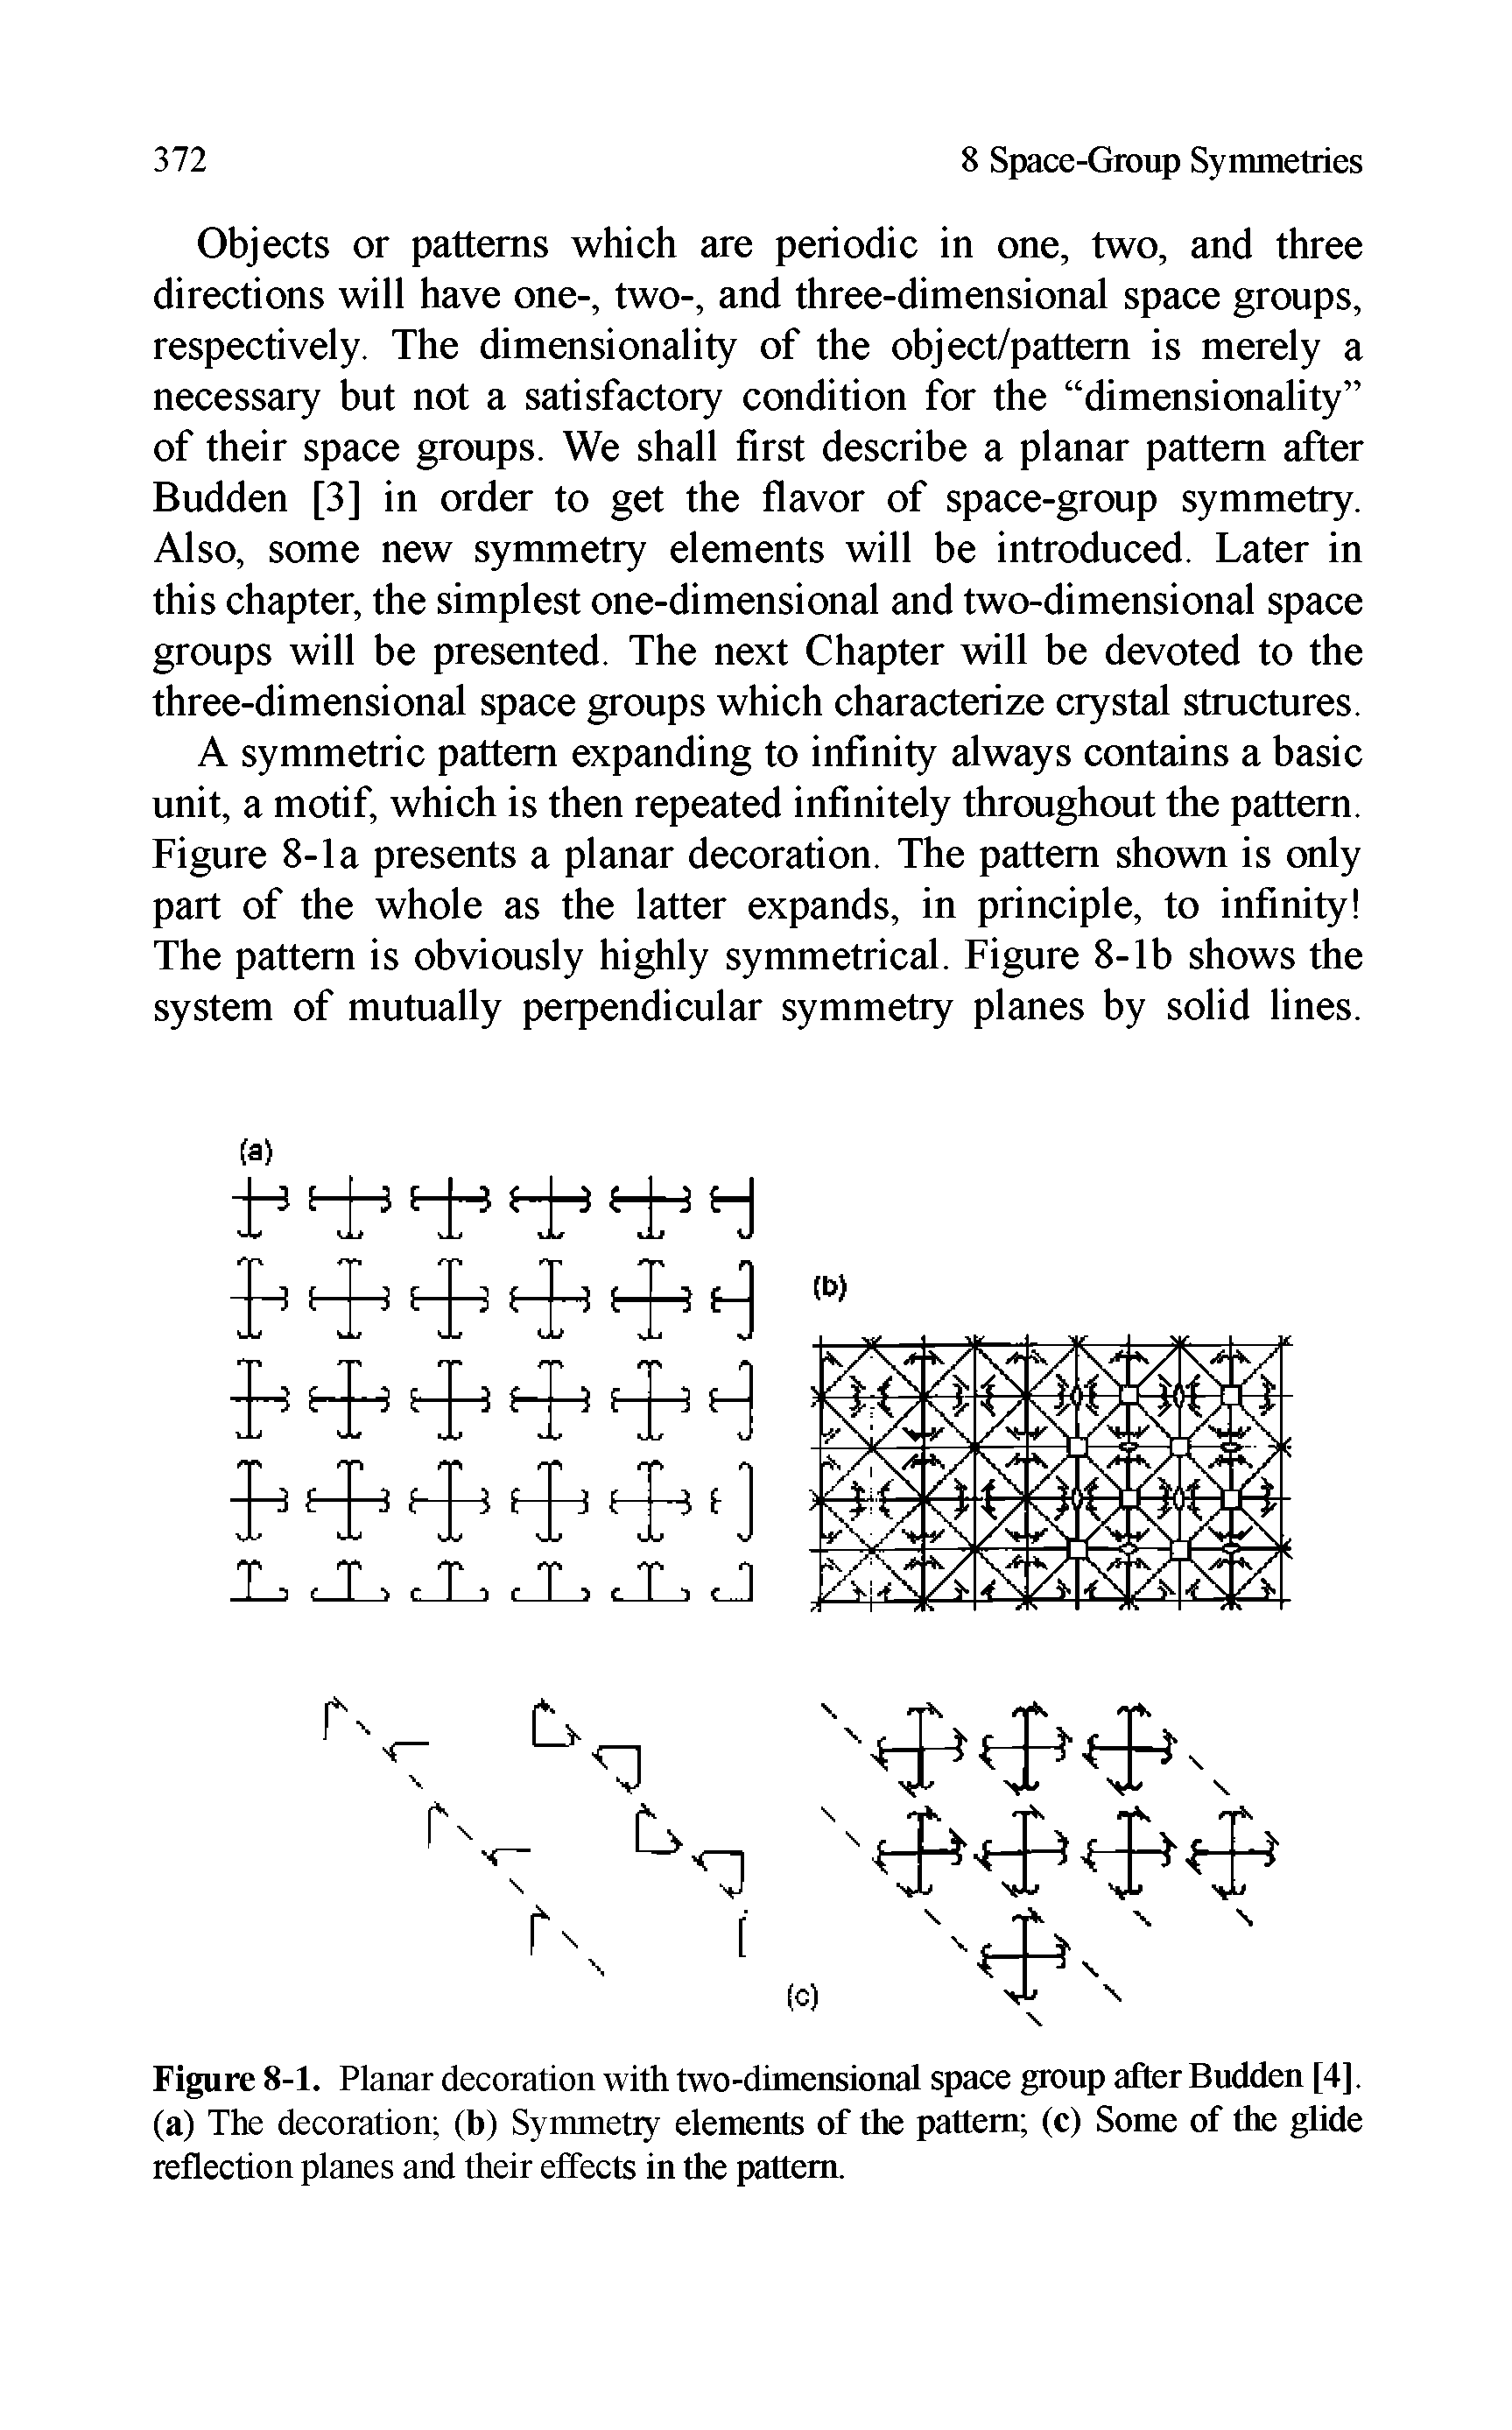 Figure 8-1. Planar decoration with two-dimensional space group after Budden [4], (a) The decoration (b) Symmetry elements of the pattern (c) Some of the glide reflection planes and their effects in the pattern.